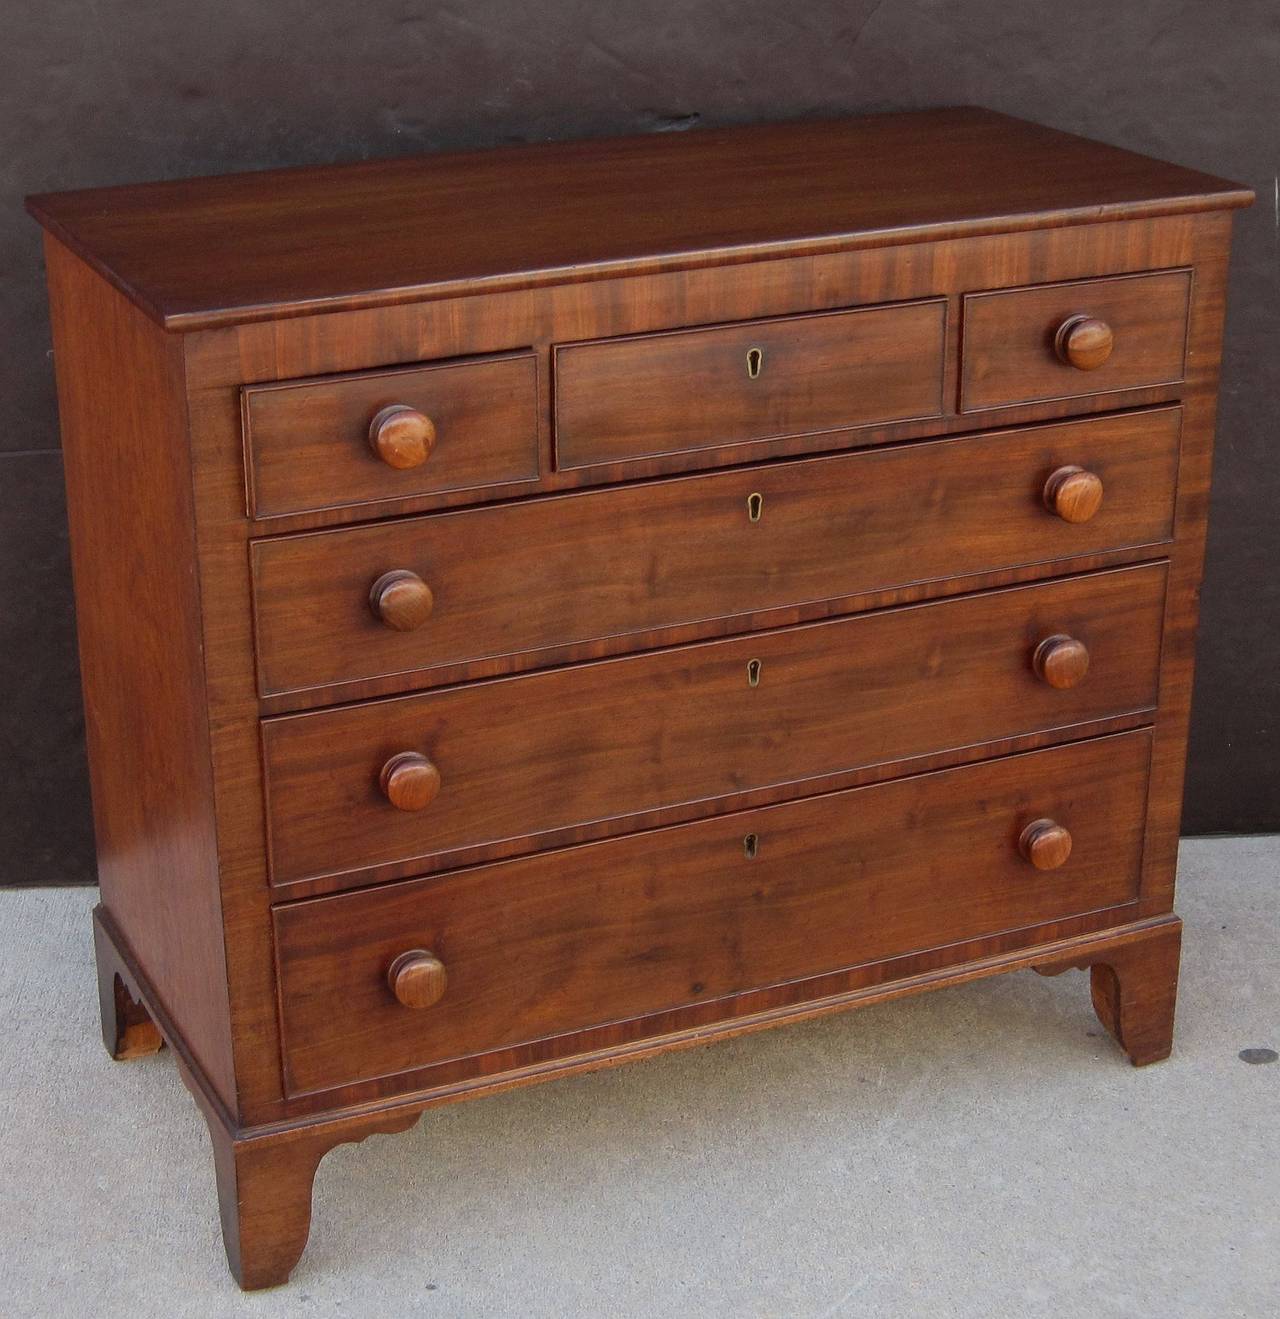 A fine English small chest of drawers of mahogany, featuring a moulded top over a frieze of three short drawers, two opposing with pull knobs over three long drawers with pull knobs. All with beaded fronts and a row of brass escutcheons through the